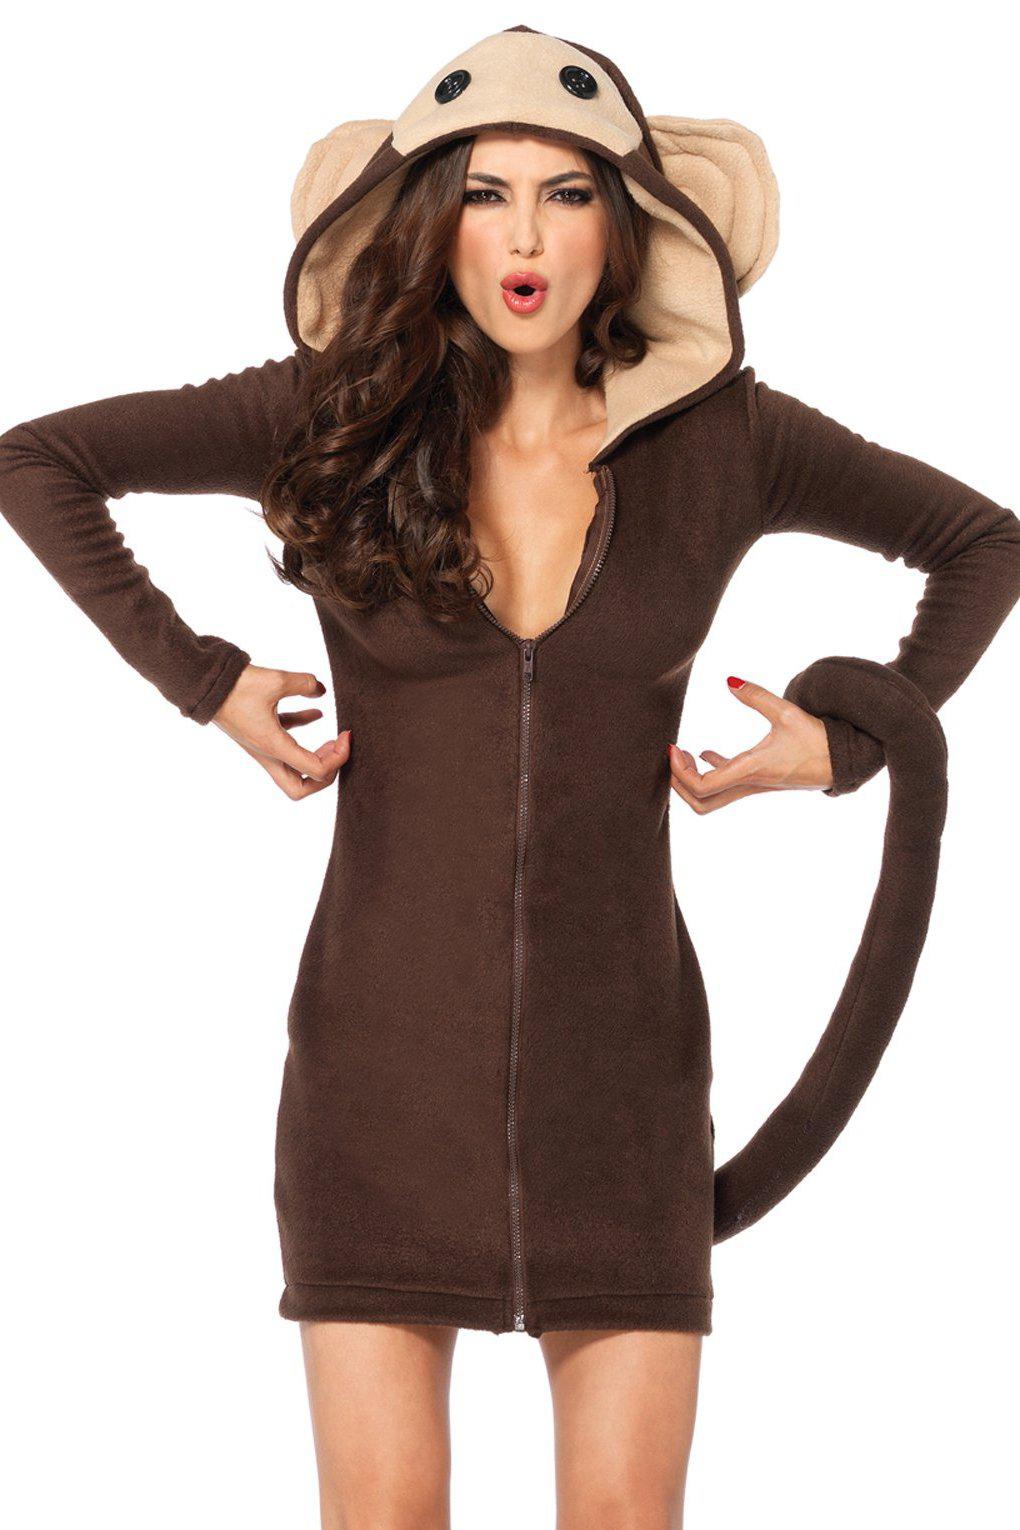 Sexy Monkey Costume Dress-Animal Costumes-Leg Avenue-Brown-S-SEXYSHOES.COM